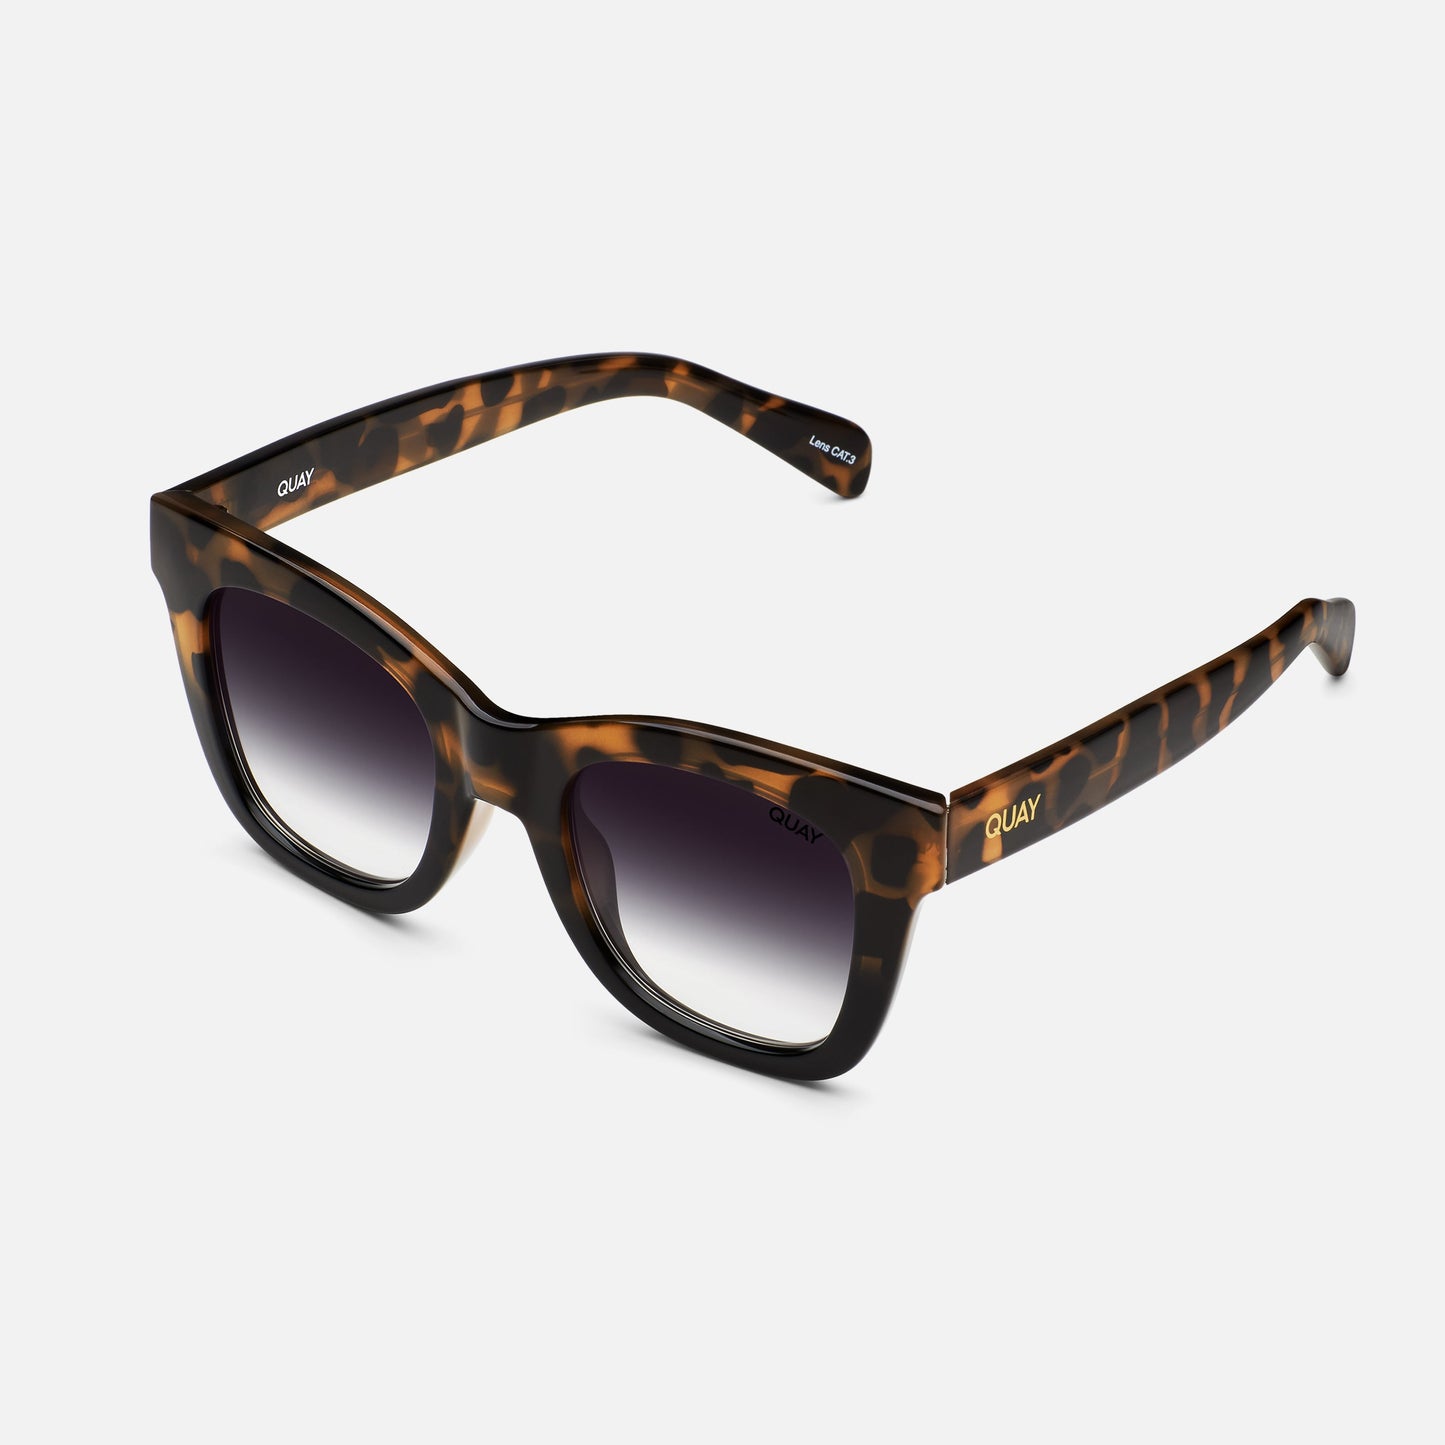 After Hours Extra Large Sunglasses, Tortoise Black/Black Fade